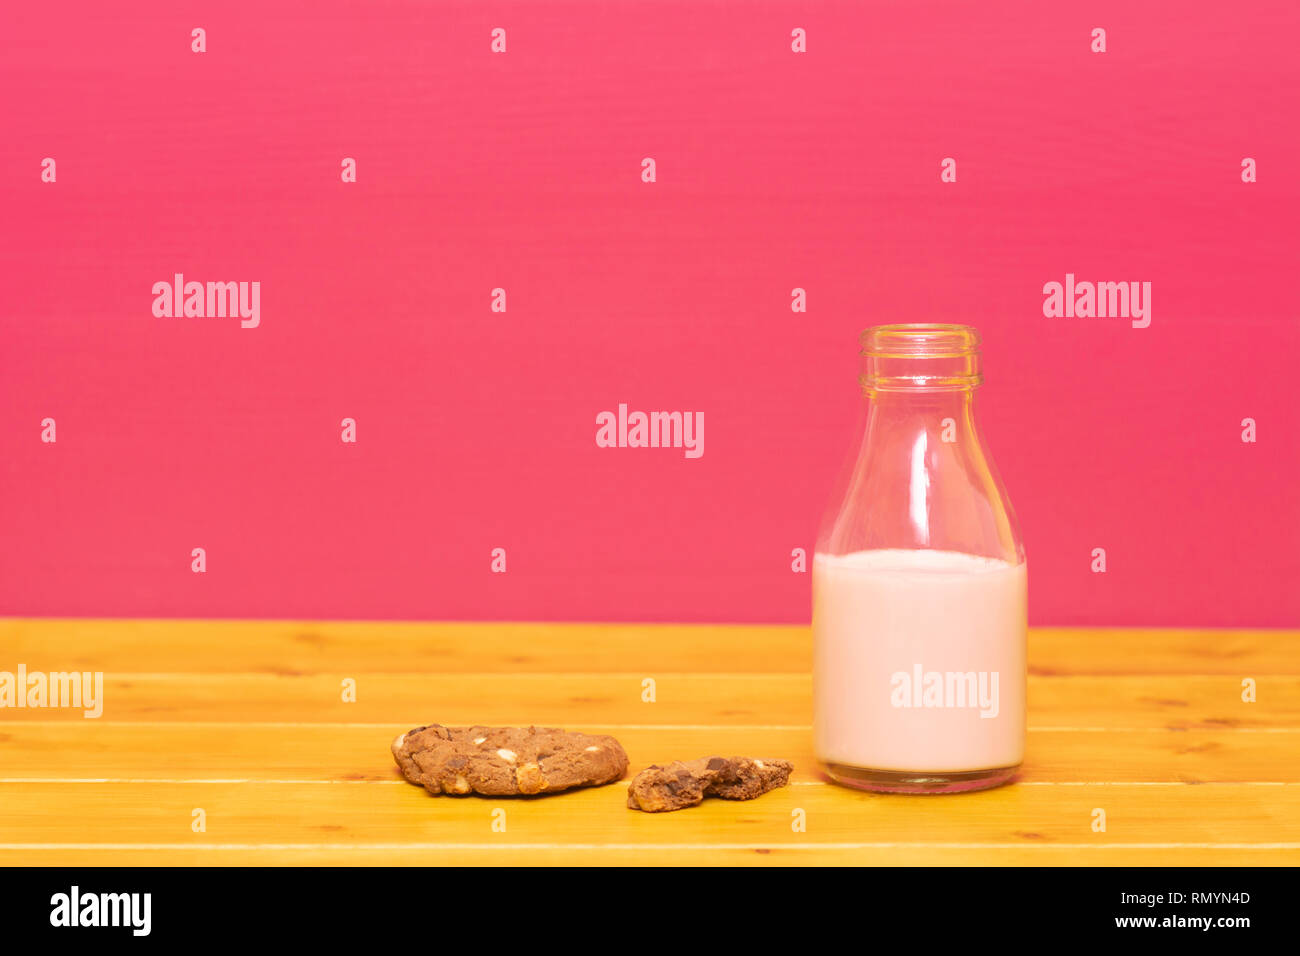 One-third pint glass milk bottle half full with strawberry milkshake and a half-eaten chocolate chip cookie, on a wooden table against a pink backgrou Stock Photo